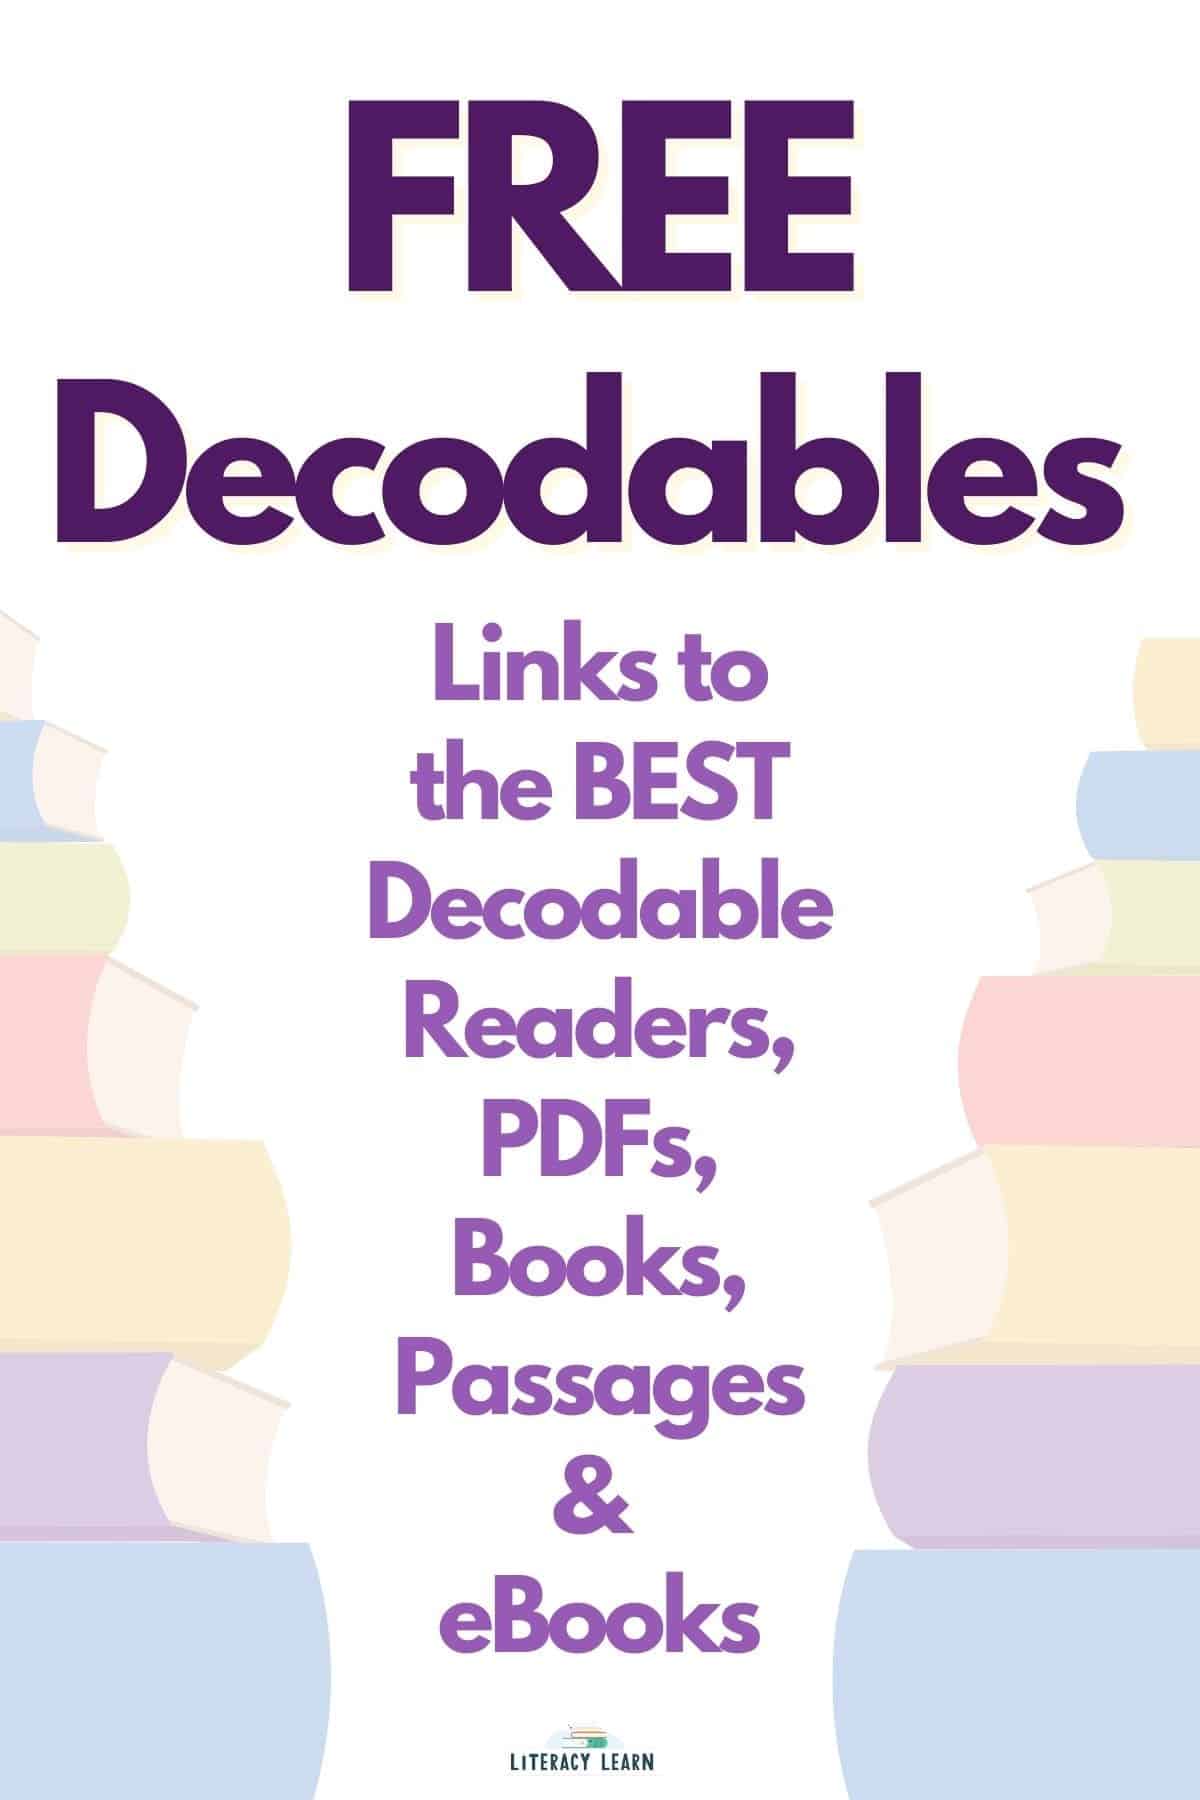 A bright graphic with large words focusing on the topic "Free Decodables."